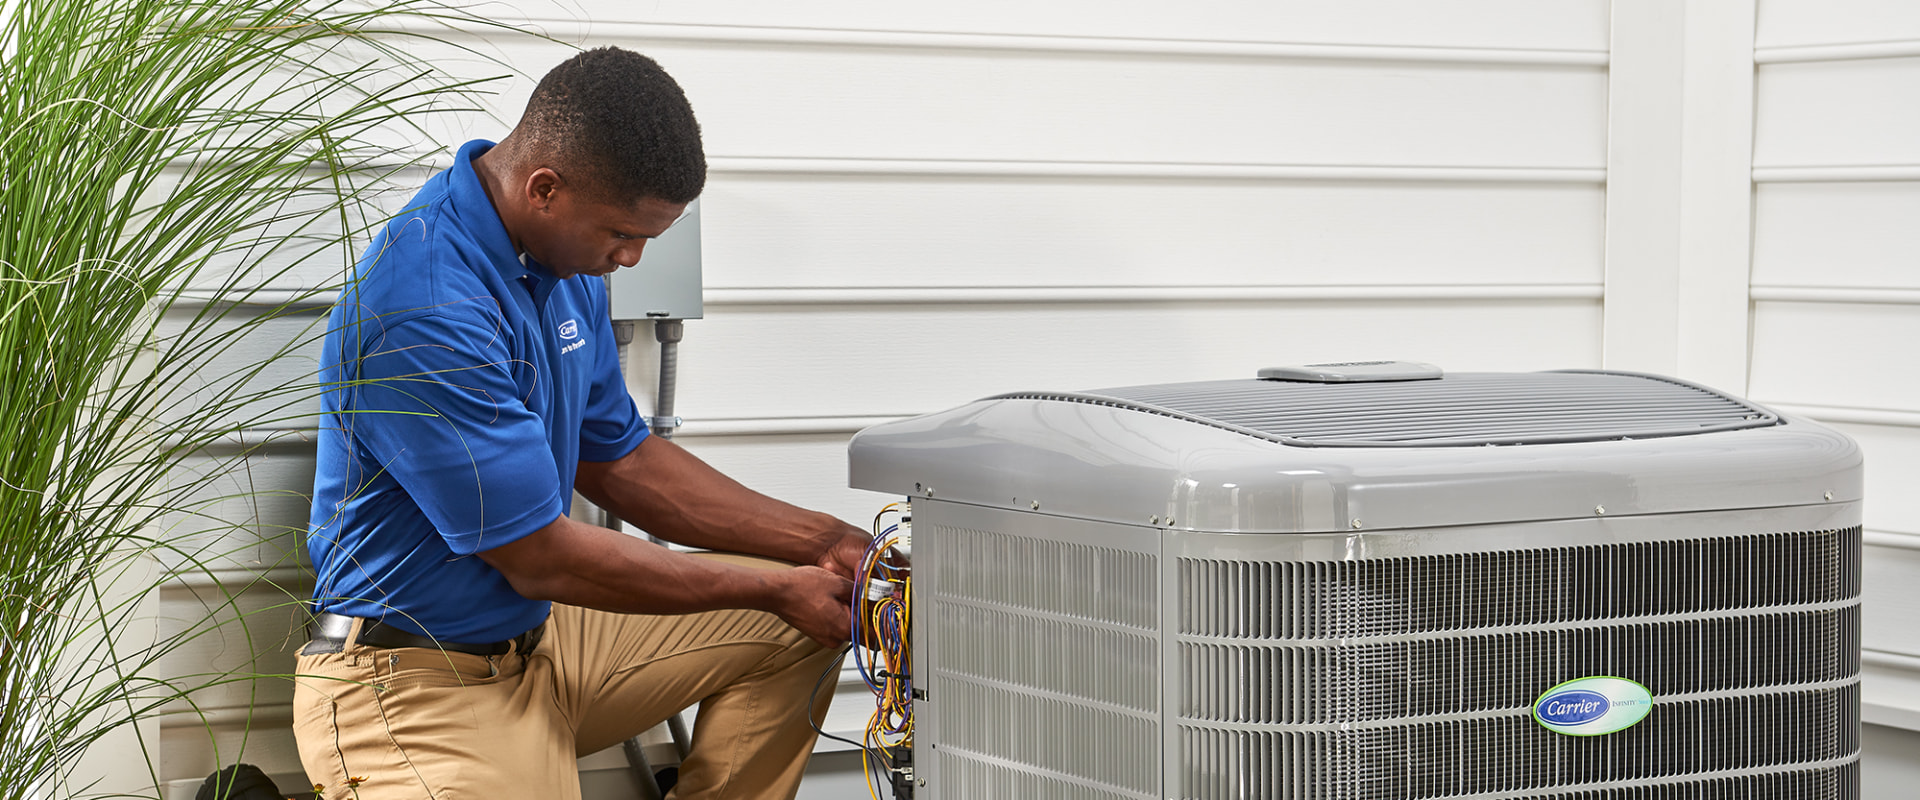 How Long Does it Take to Install an AC Condenser?